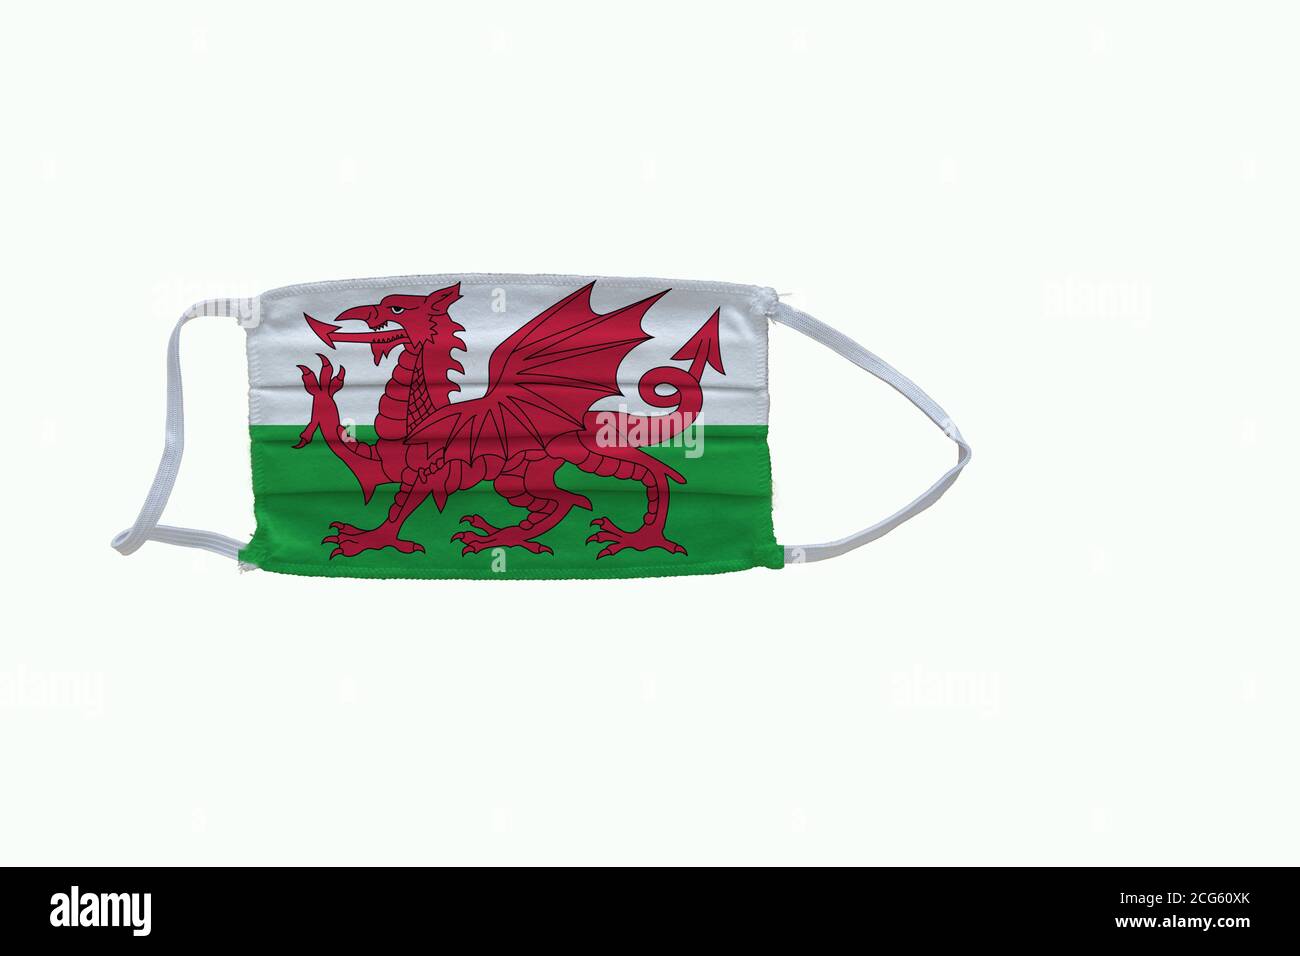 Welsh flag design Covid-19 pandemic  virus face mask  on a white background with copy space Stock Photo